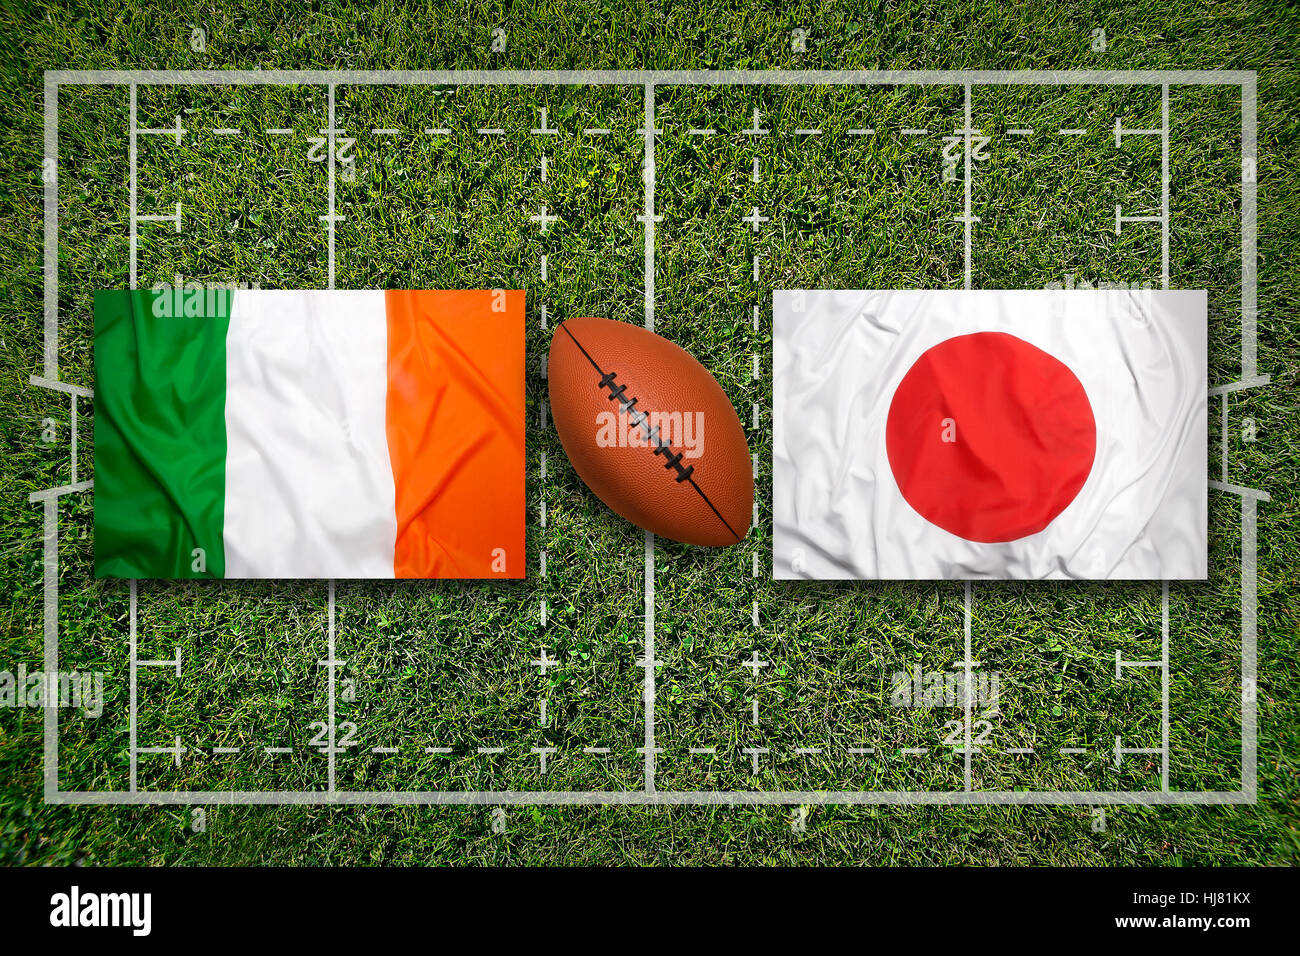 Ireland vs. Japan flags on green rugby field Stock Photo